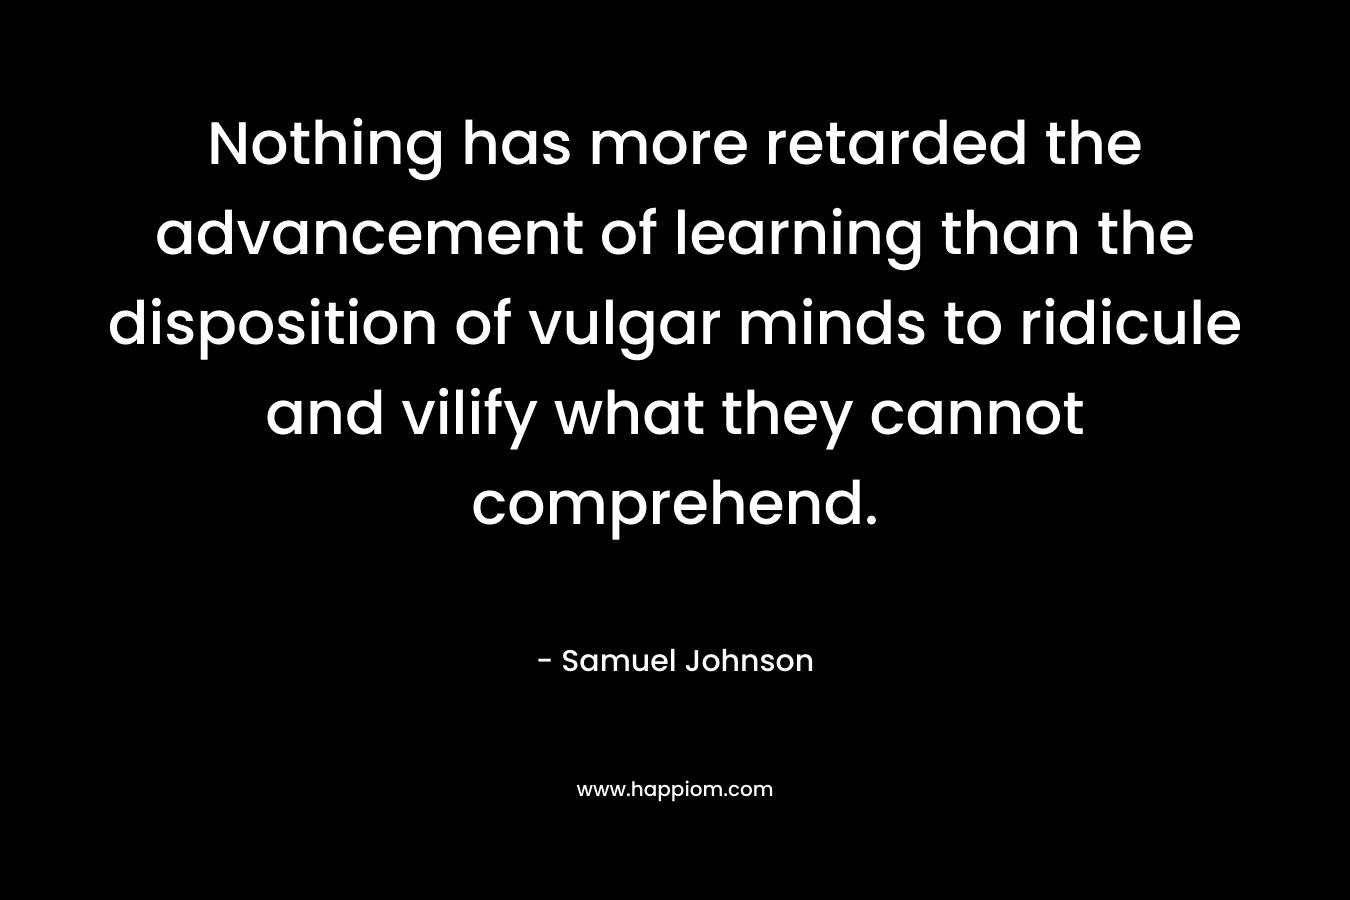 Nothing has more retarded the advancement of learning than the disposition of vulgar minds to ridicule and vilify what they cannot comprehend.